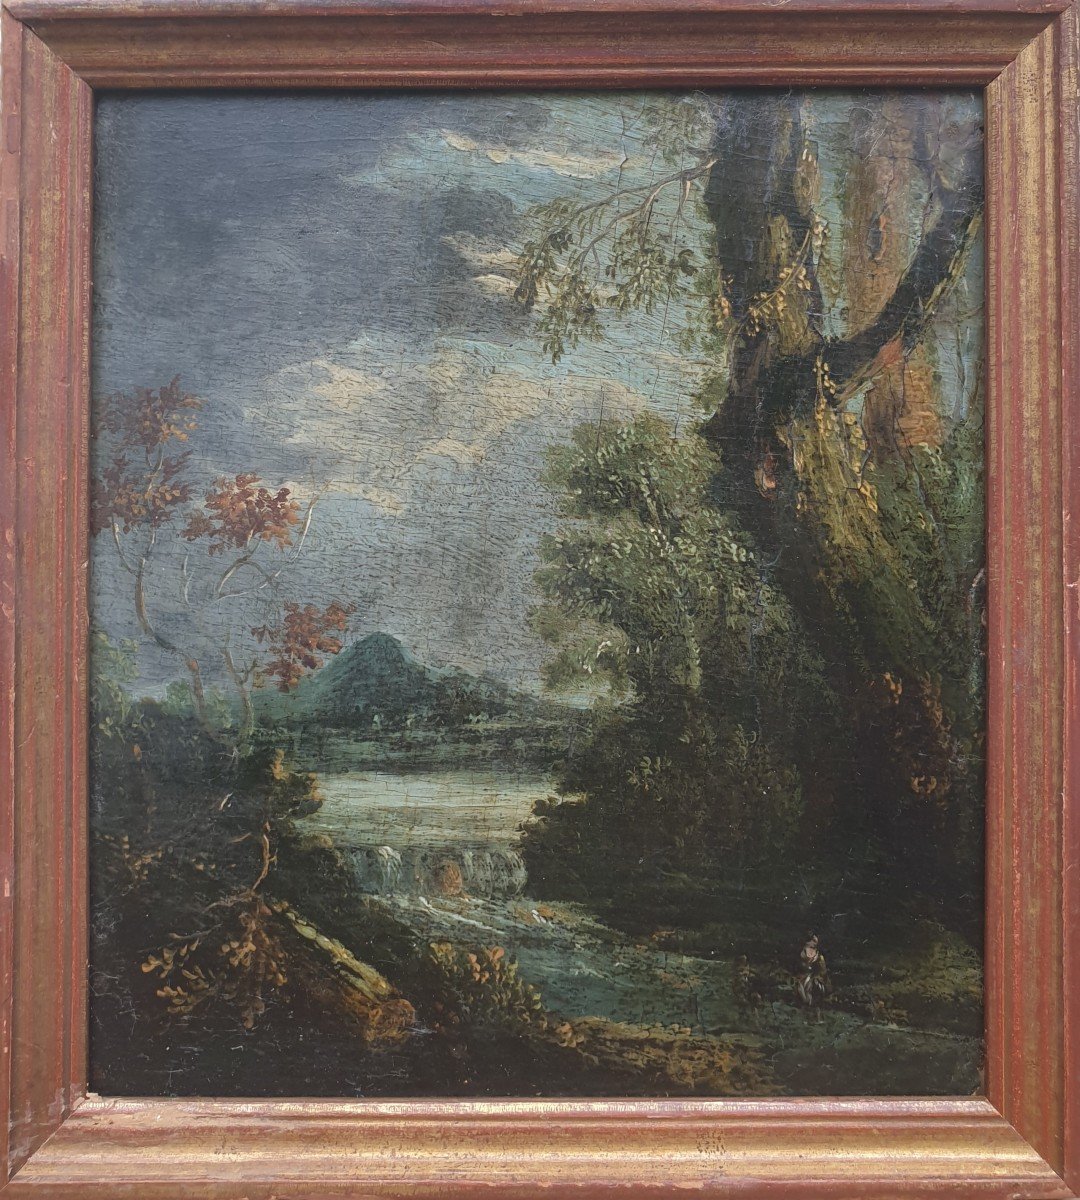 Italian School Of The 17th Century - Landscape At The River